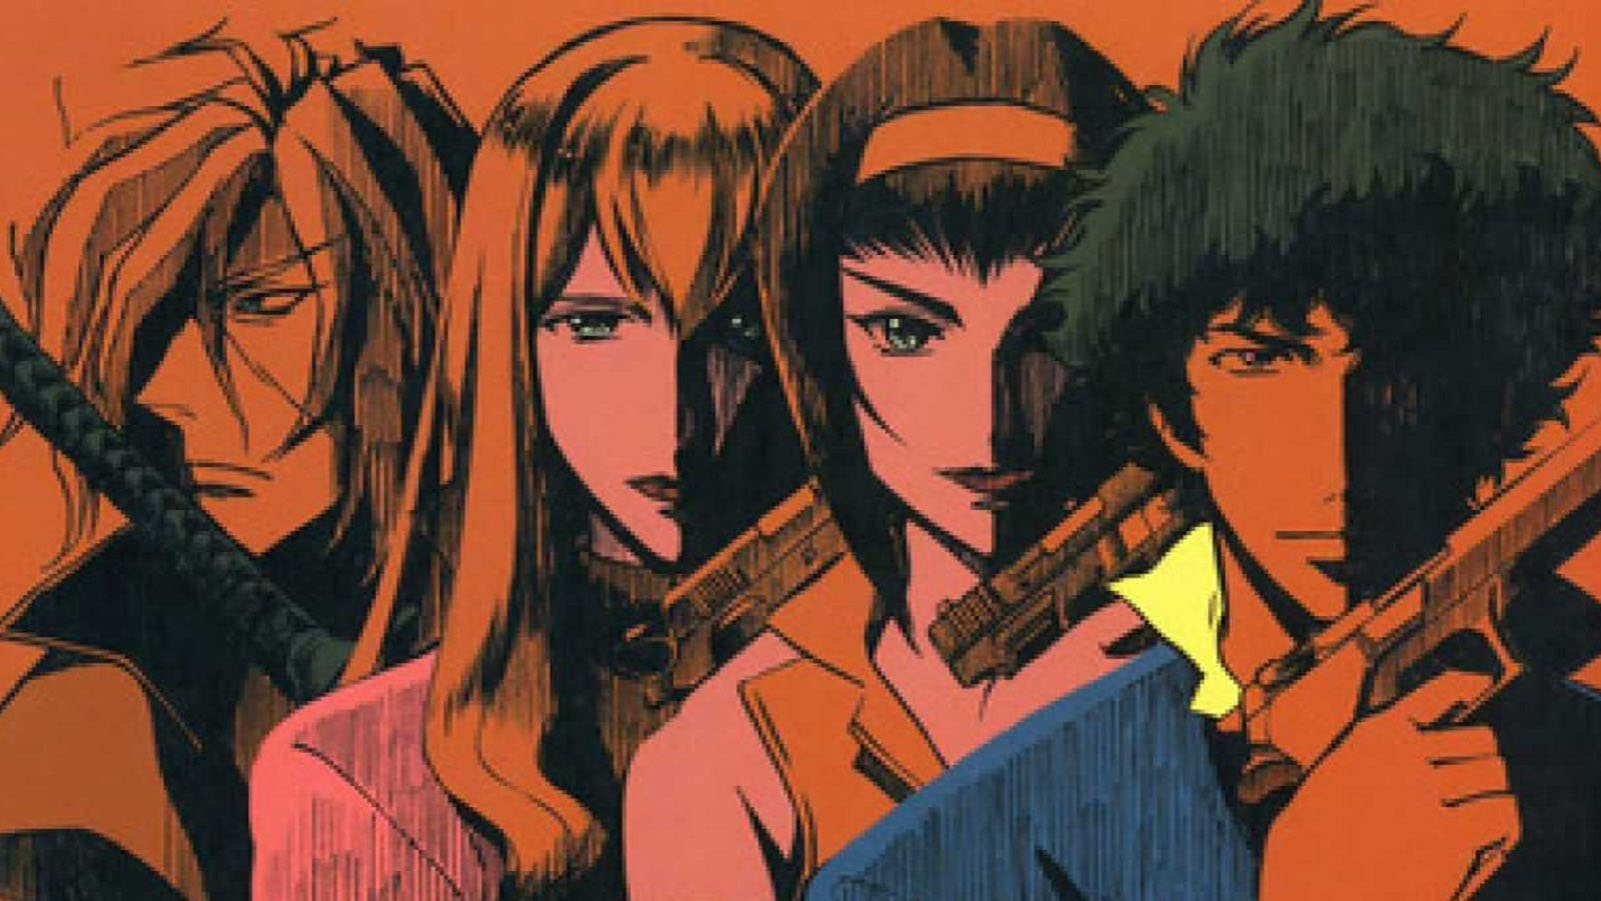 Cowboy Bebop (Japanese: ?????????, Hepburn: Kaub?i Bibappu) is a Japanese science fiction anime television series animated by Sunrise and created by a...